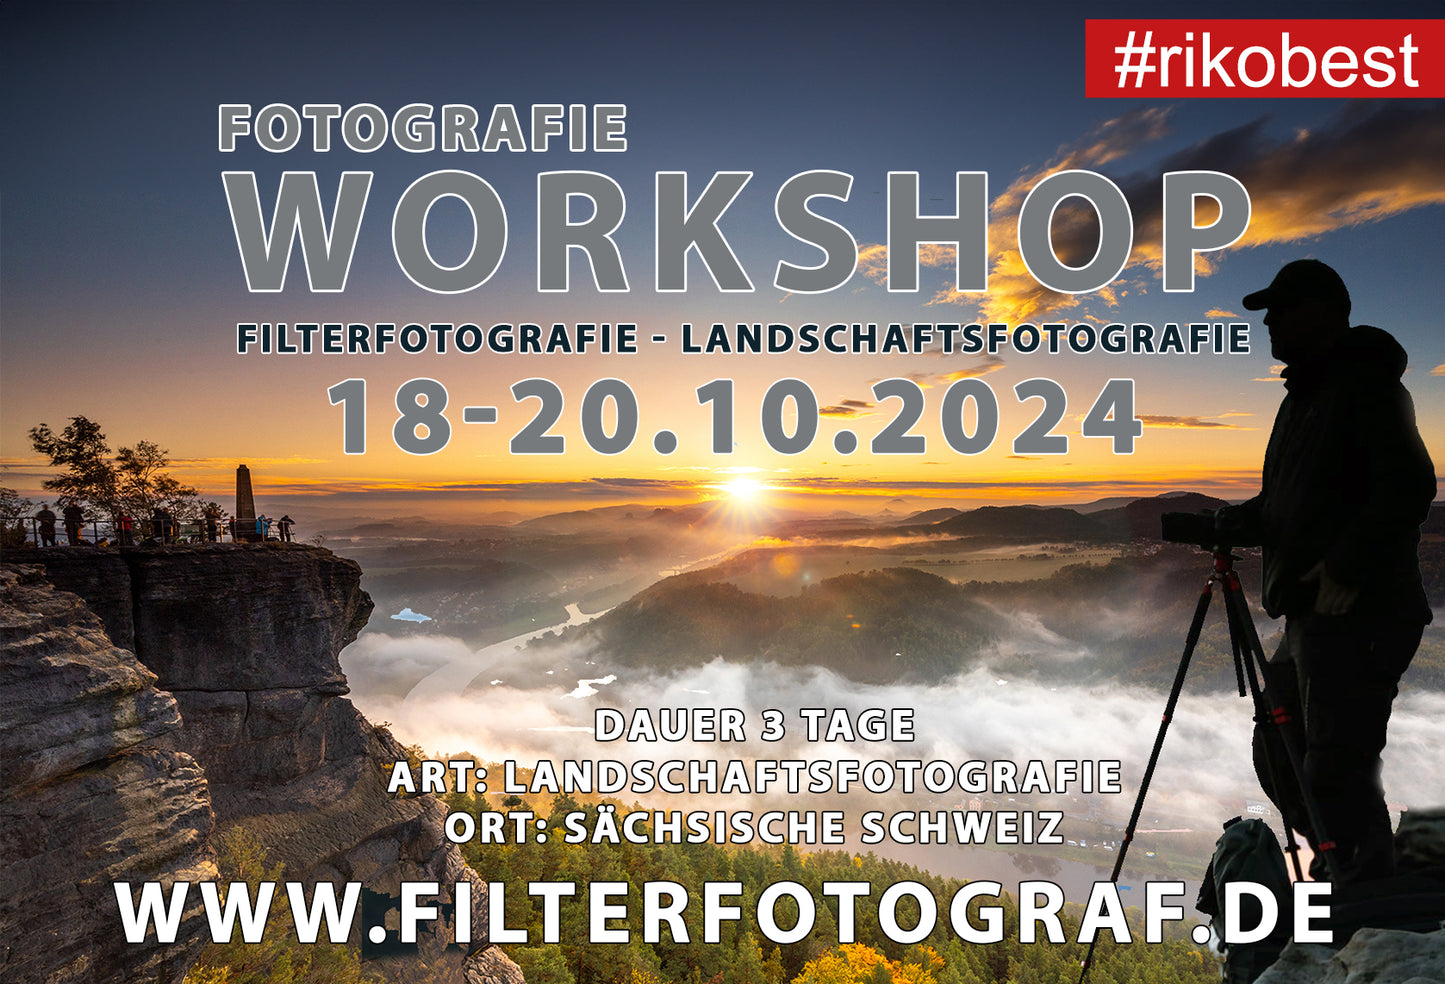 Photography Workshop - 3 day intensive workshop - Saxon Switzerland - October 18-20, 2024 (including overnight stay)